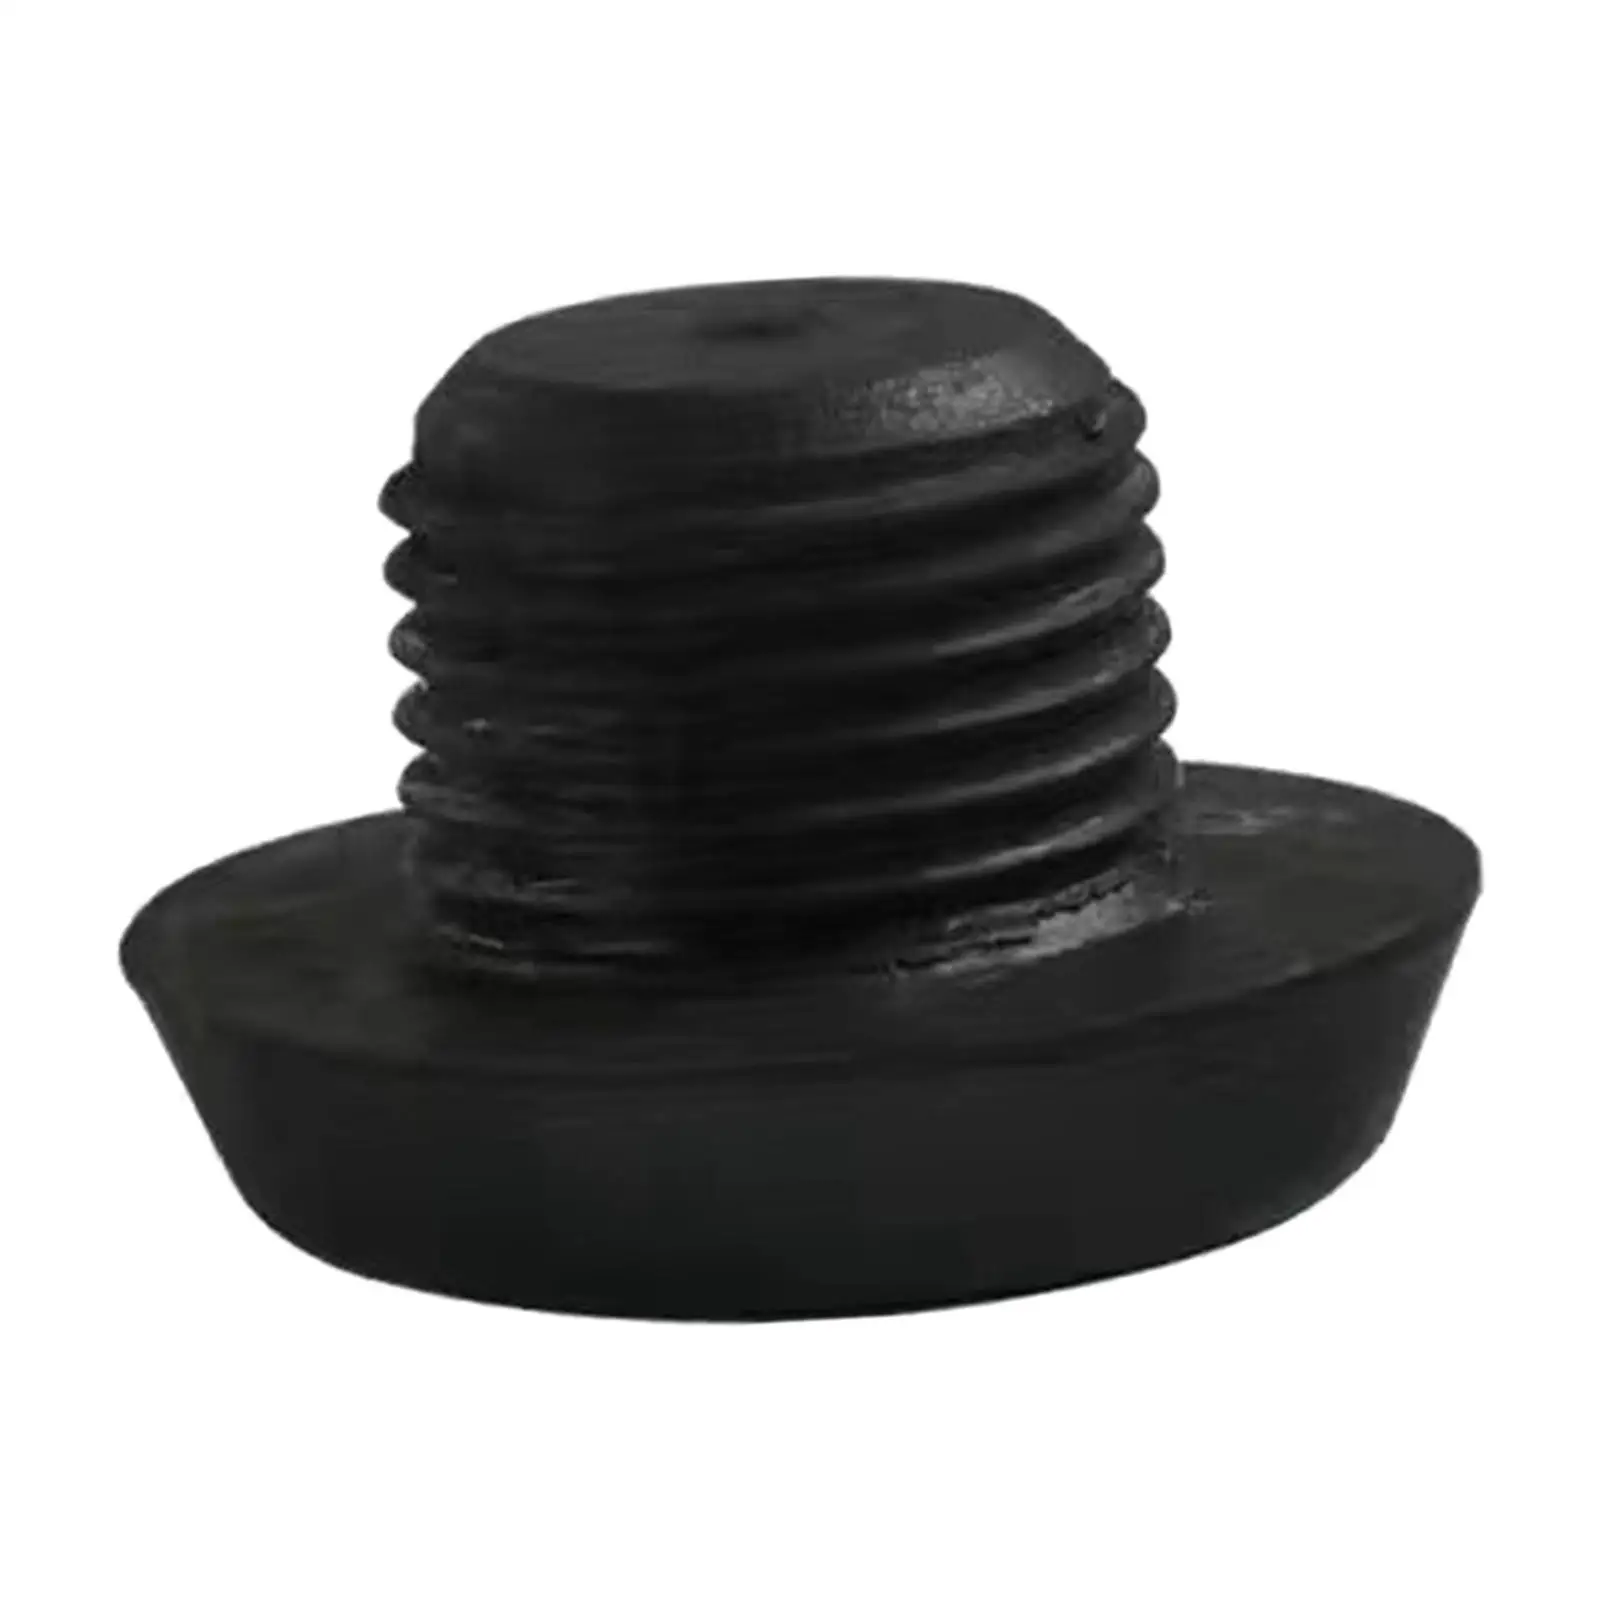 Billiard Cue Rubber Billiard Back Plug Screw Pole Tail cover Resistant Billiard End Connected Extension for Most Pool Cues